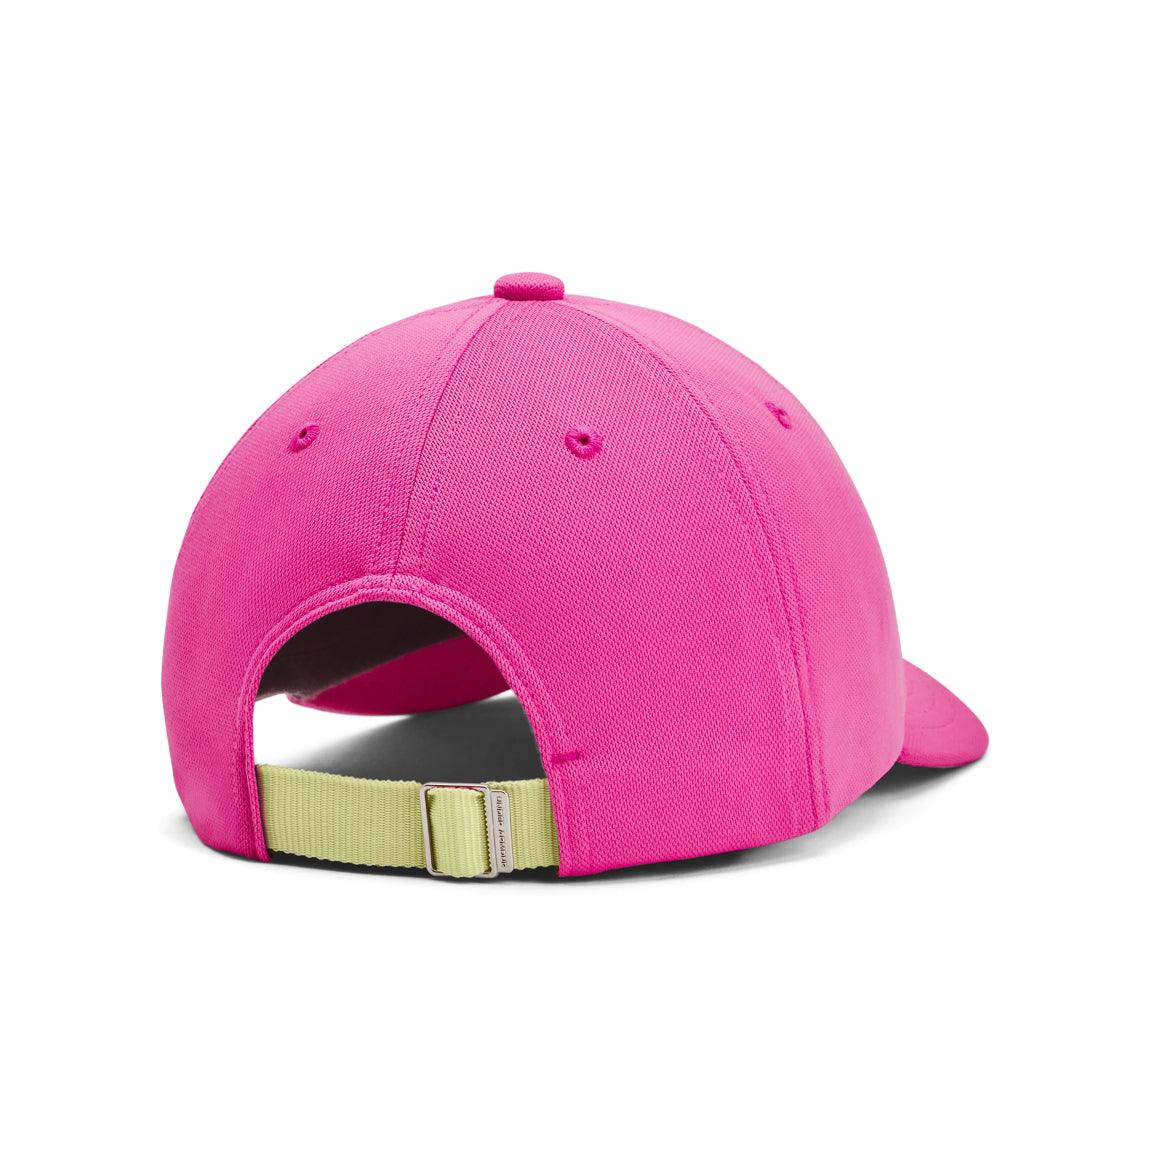 Under Armour Blitzing Adjustable Cap - Girls - Sports Excellence